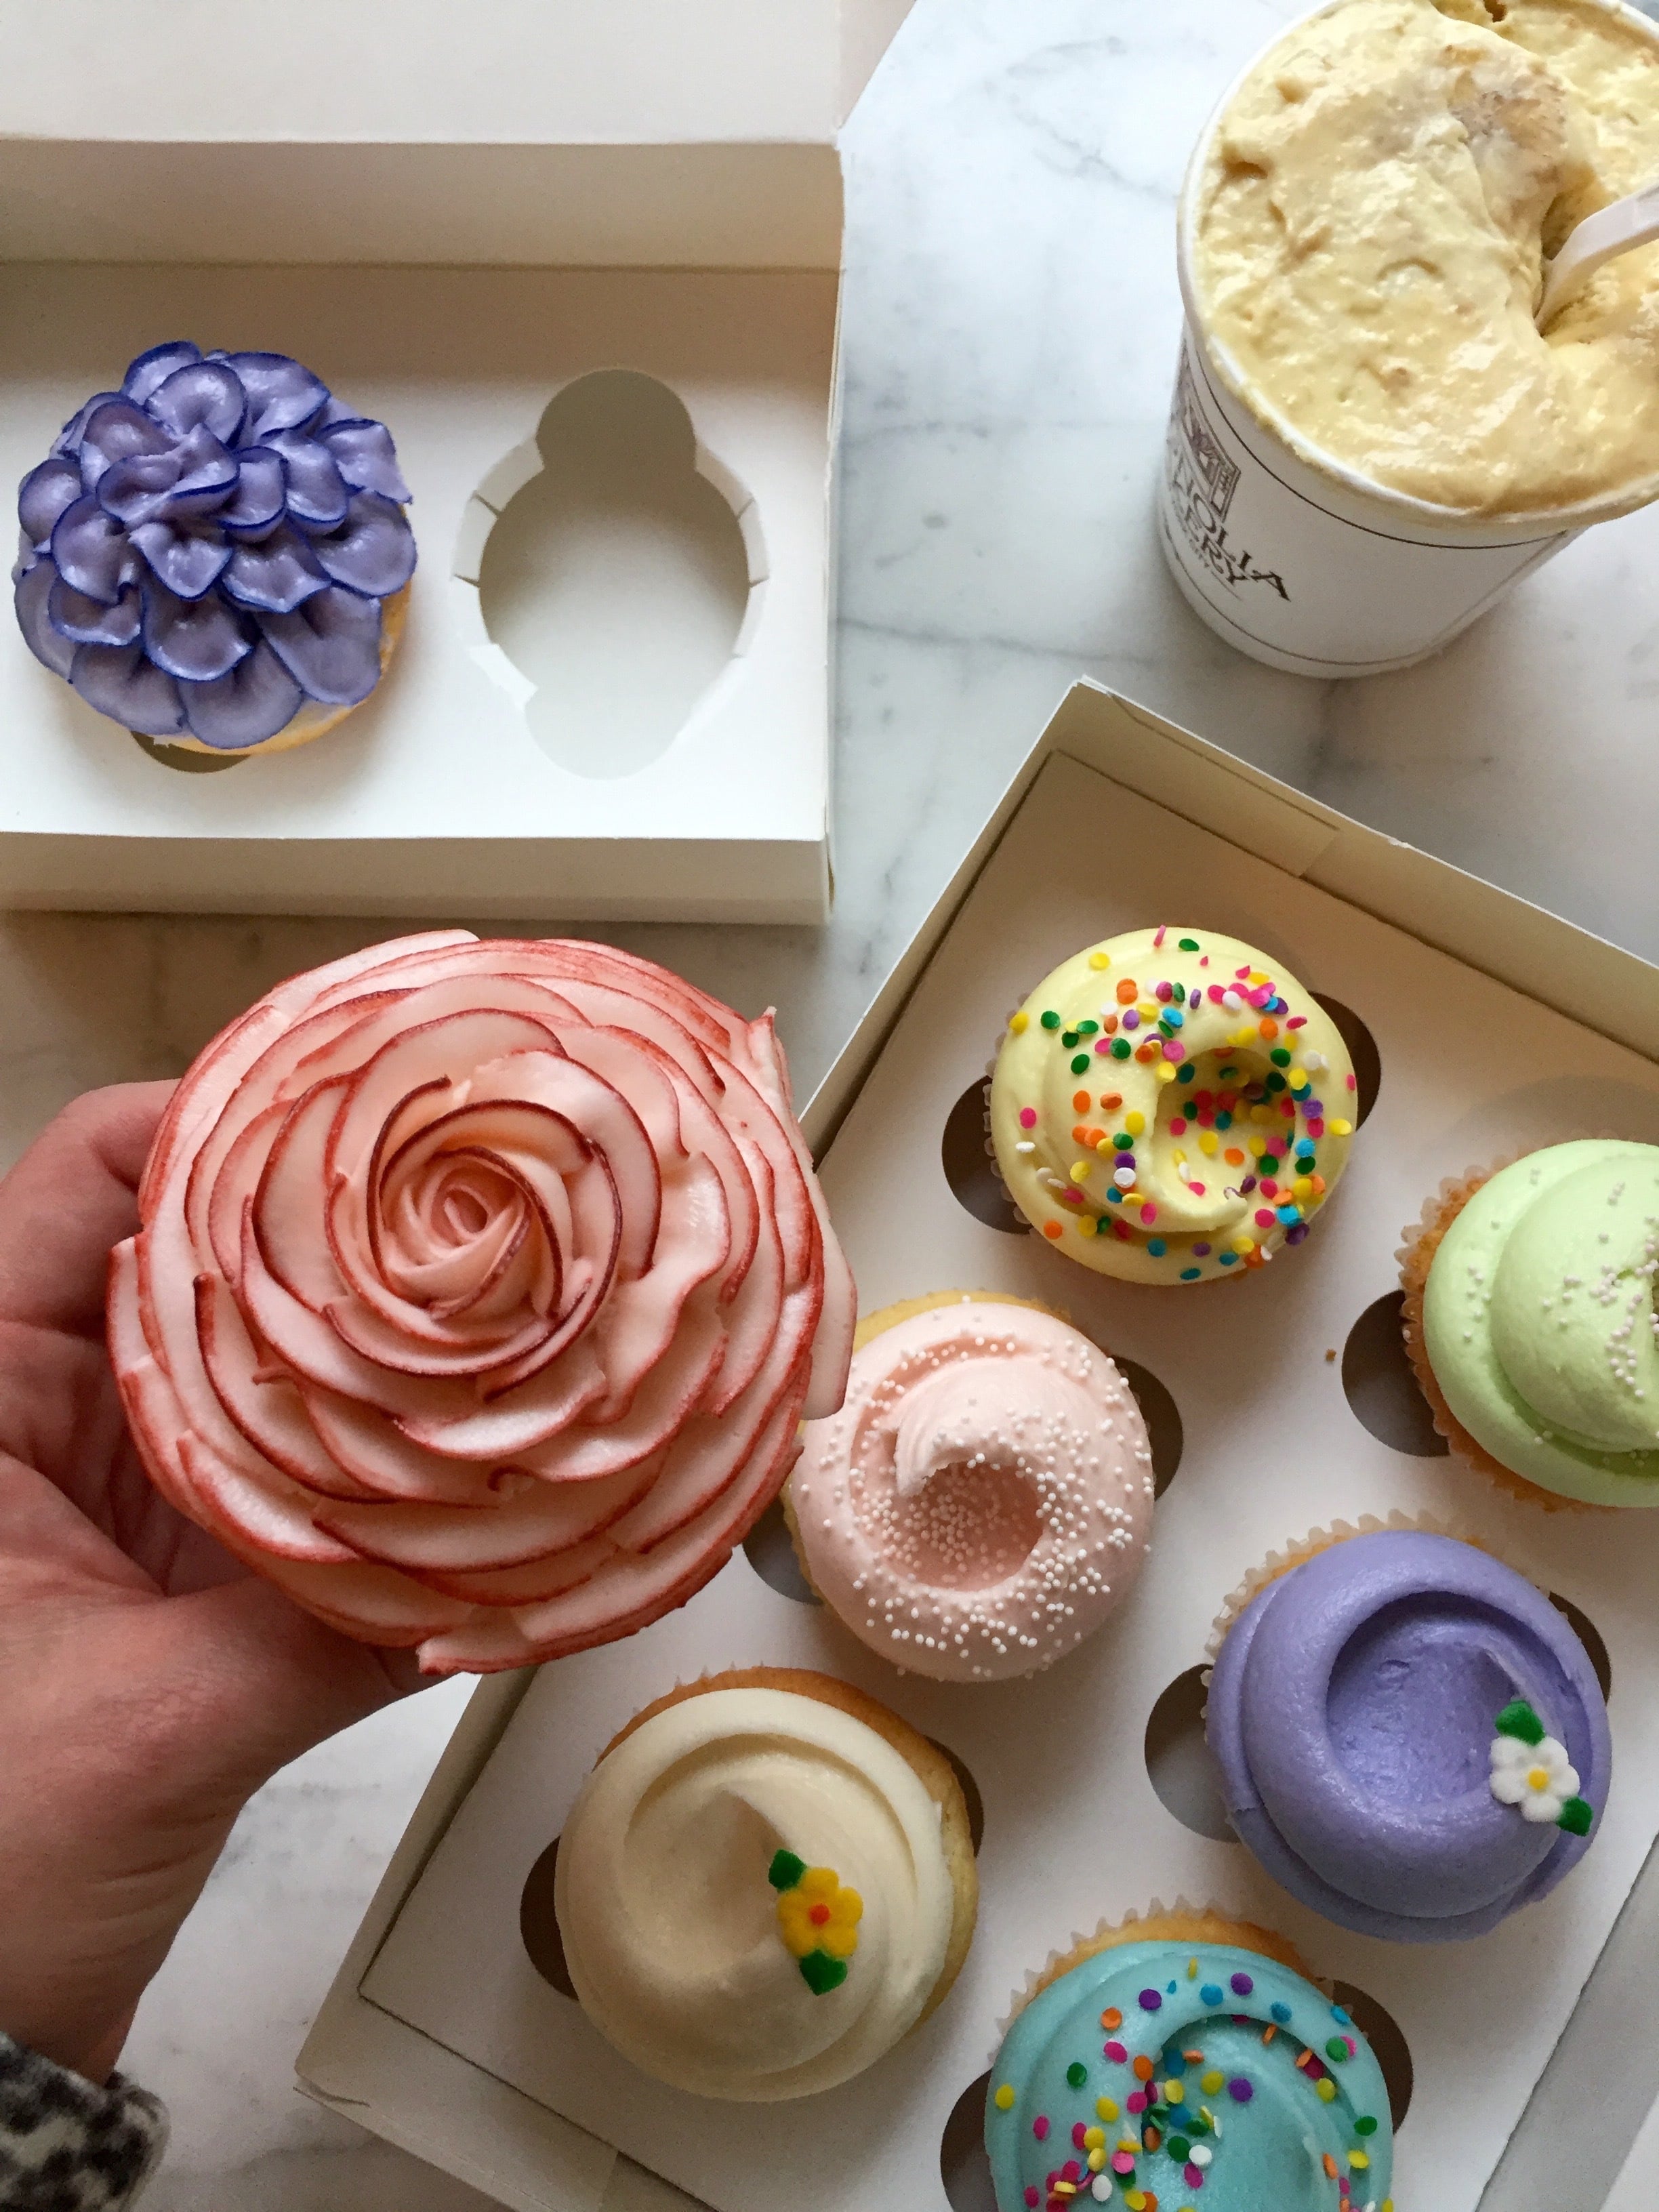 12 Best Cakes in NYC - Our Favorite NYC Bakeries for Cakes